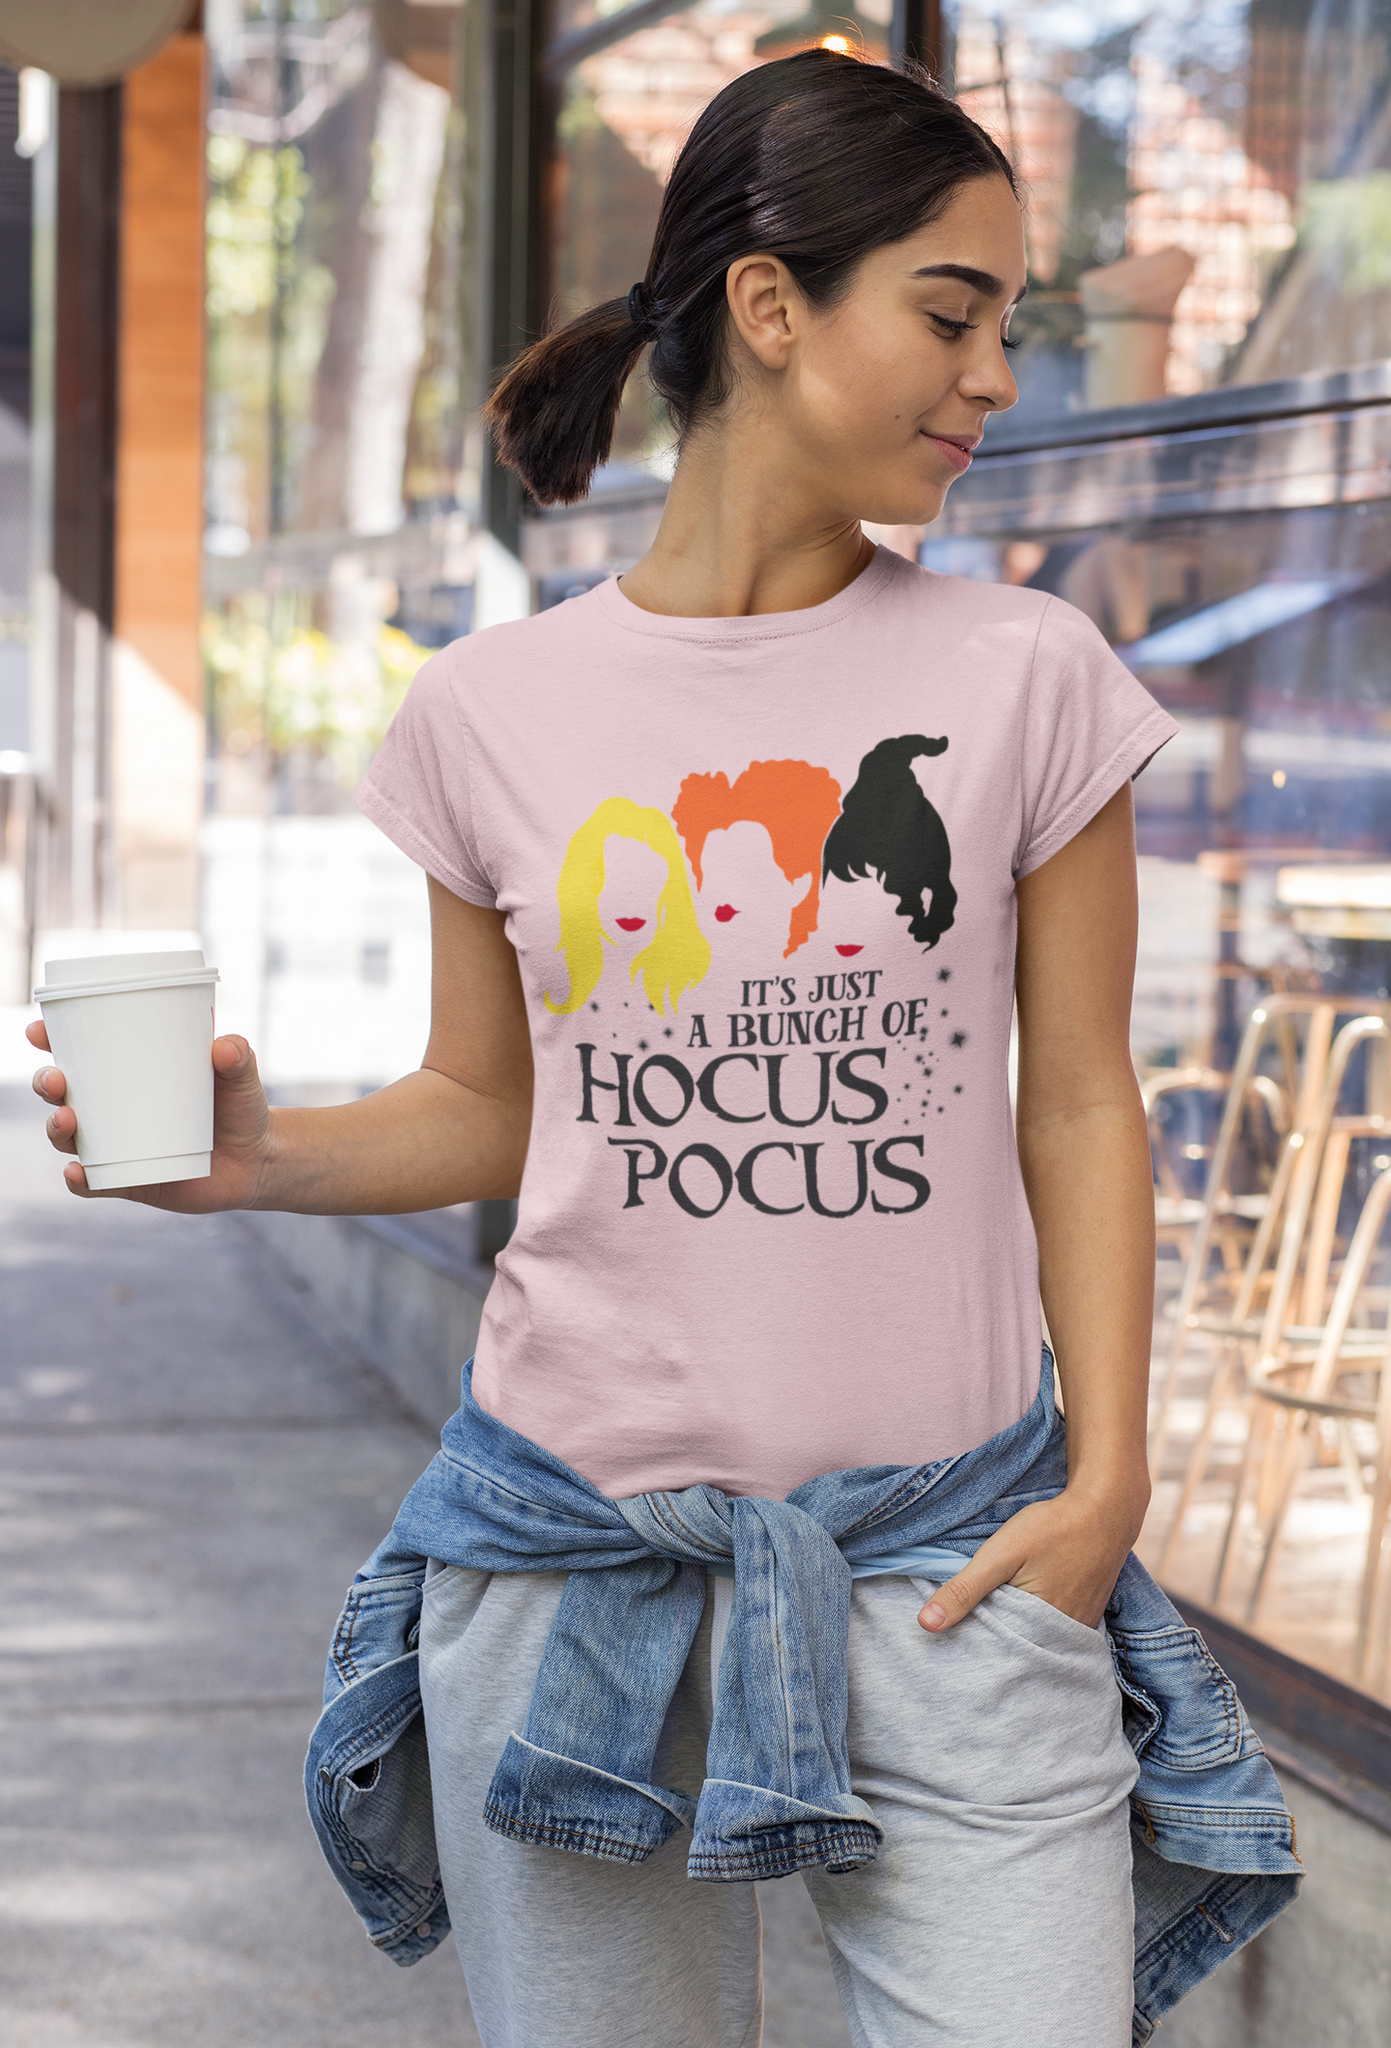 Hocus Pocus Tshirt, Sanderson Sisters T Shirt, Its Just A Bunch Of Hocus Pocus Shirt, Halloween Gifts